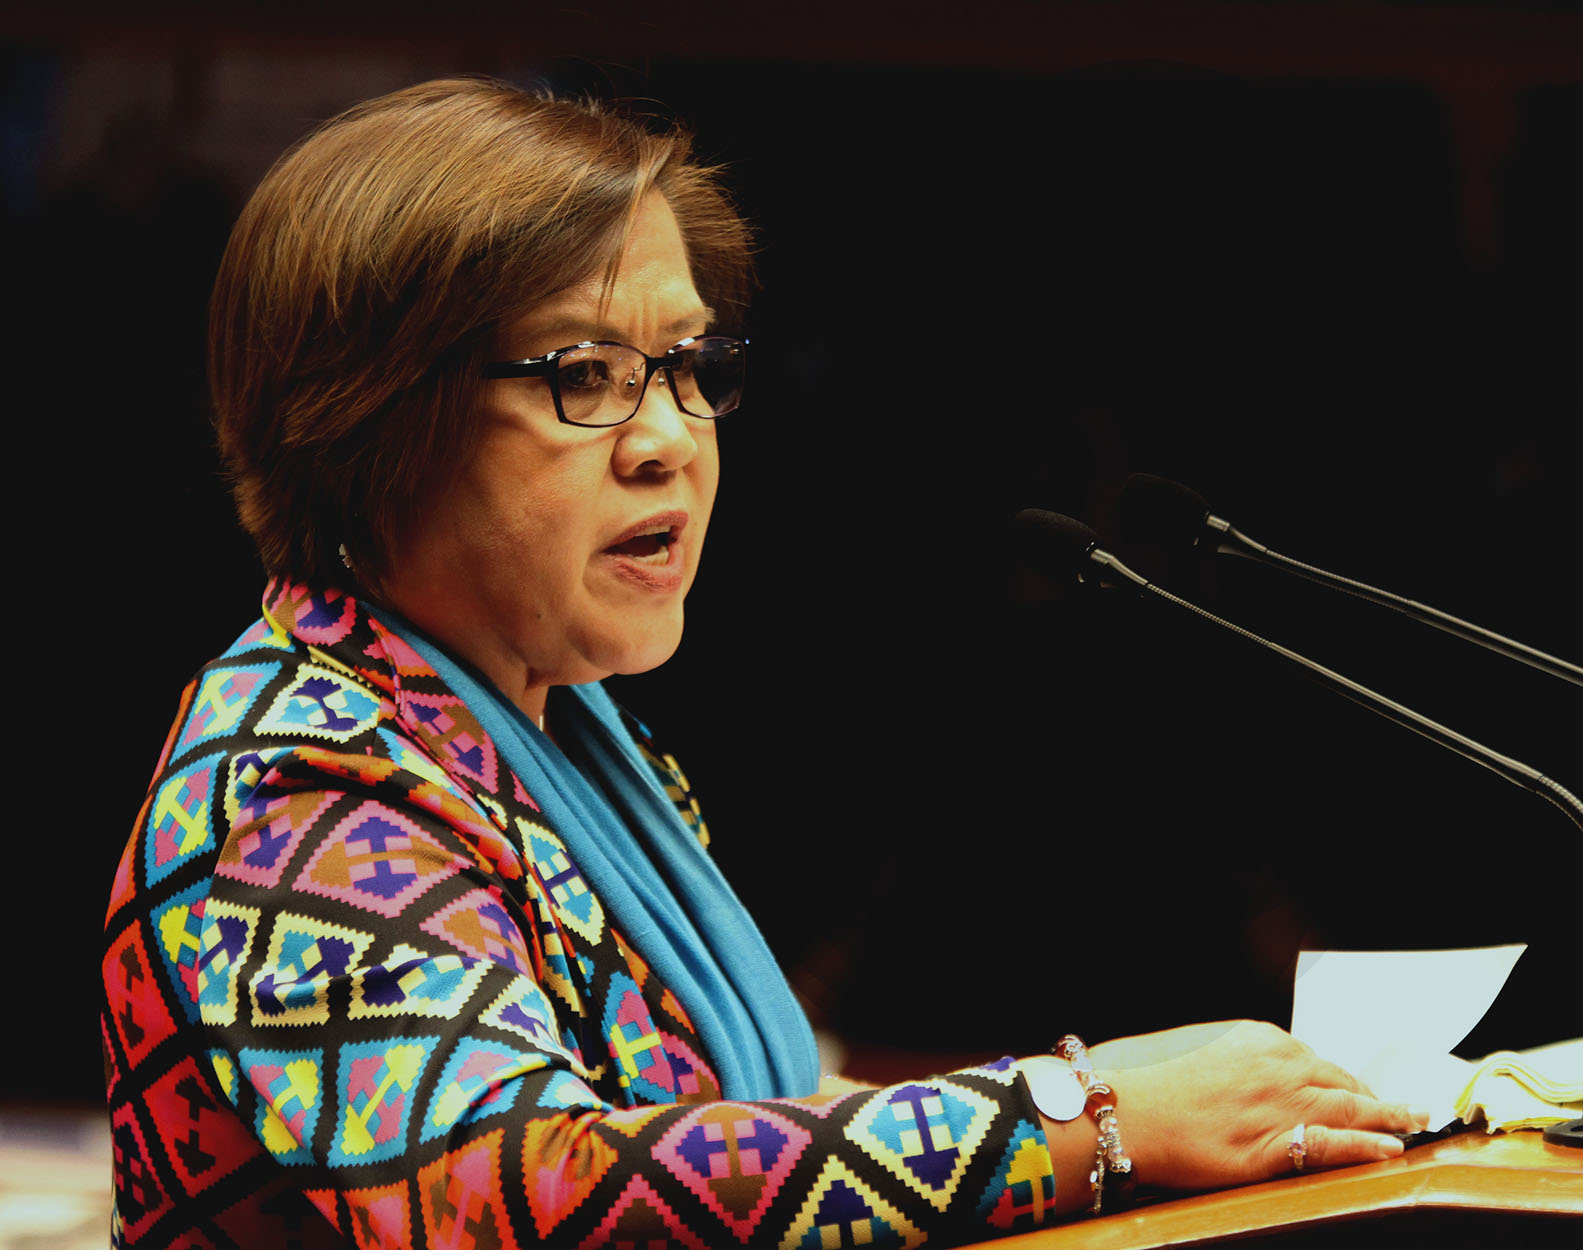 UN PROBE. Senator Leila De Lima urges the Department of Foreign Affairs to invite the United Nations to conduct a probe into the extrajudicial killings in the Philippines. Photo by Cesar Tomambo/PRIB  